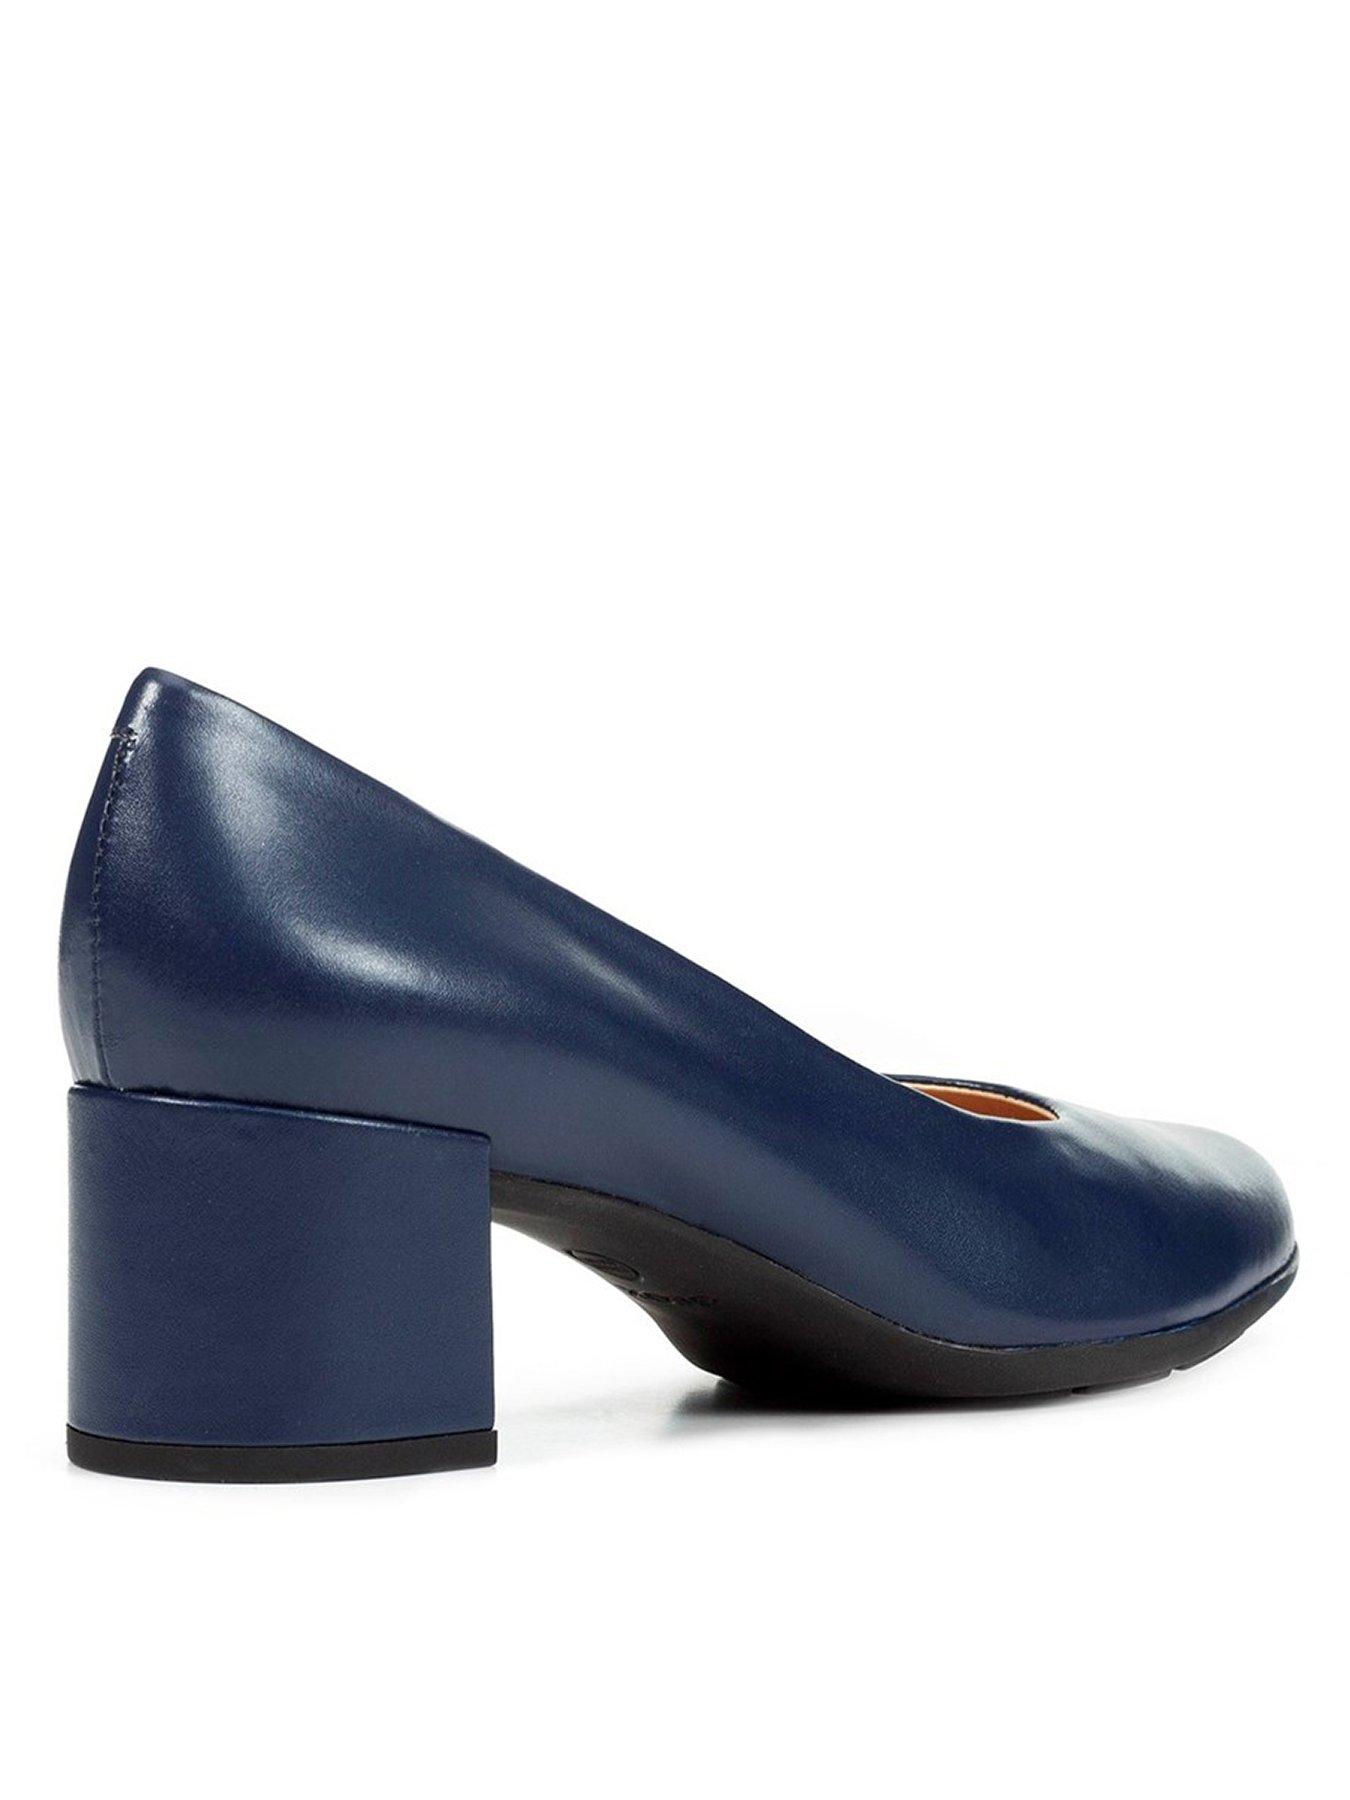 Geox Annya Leather Heeled Shoes - Navy | littlewoods.com